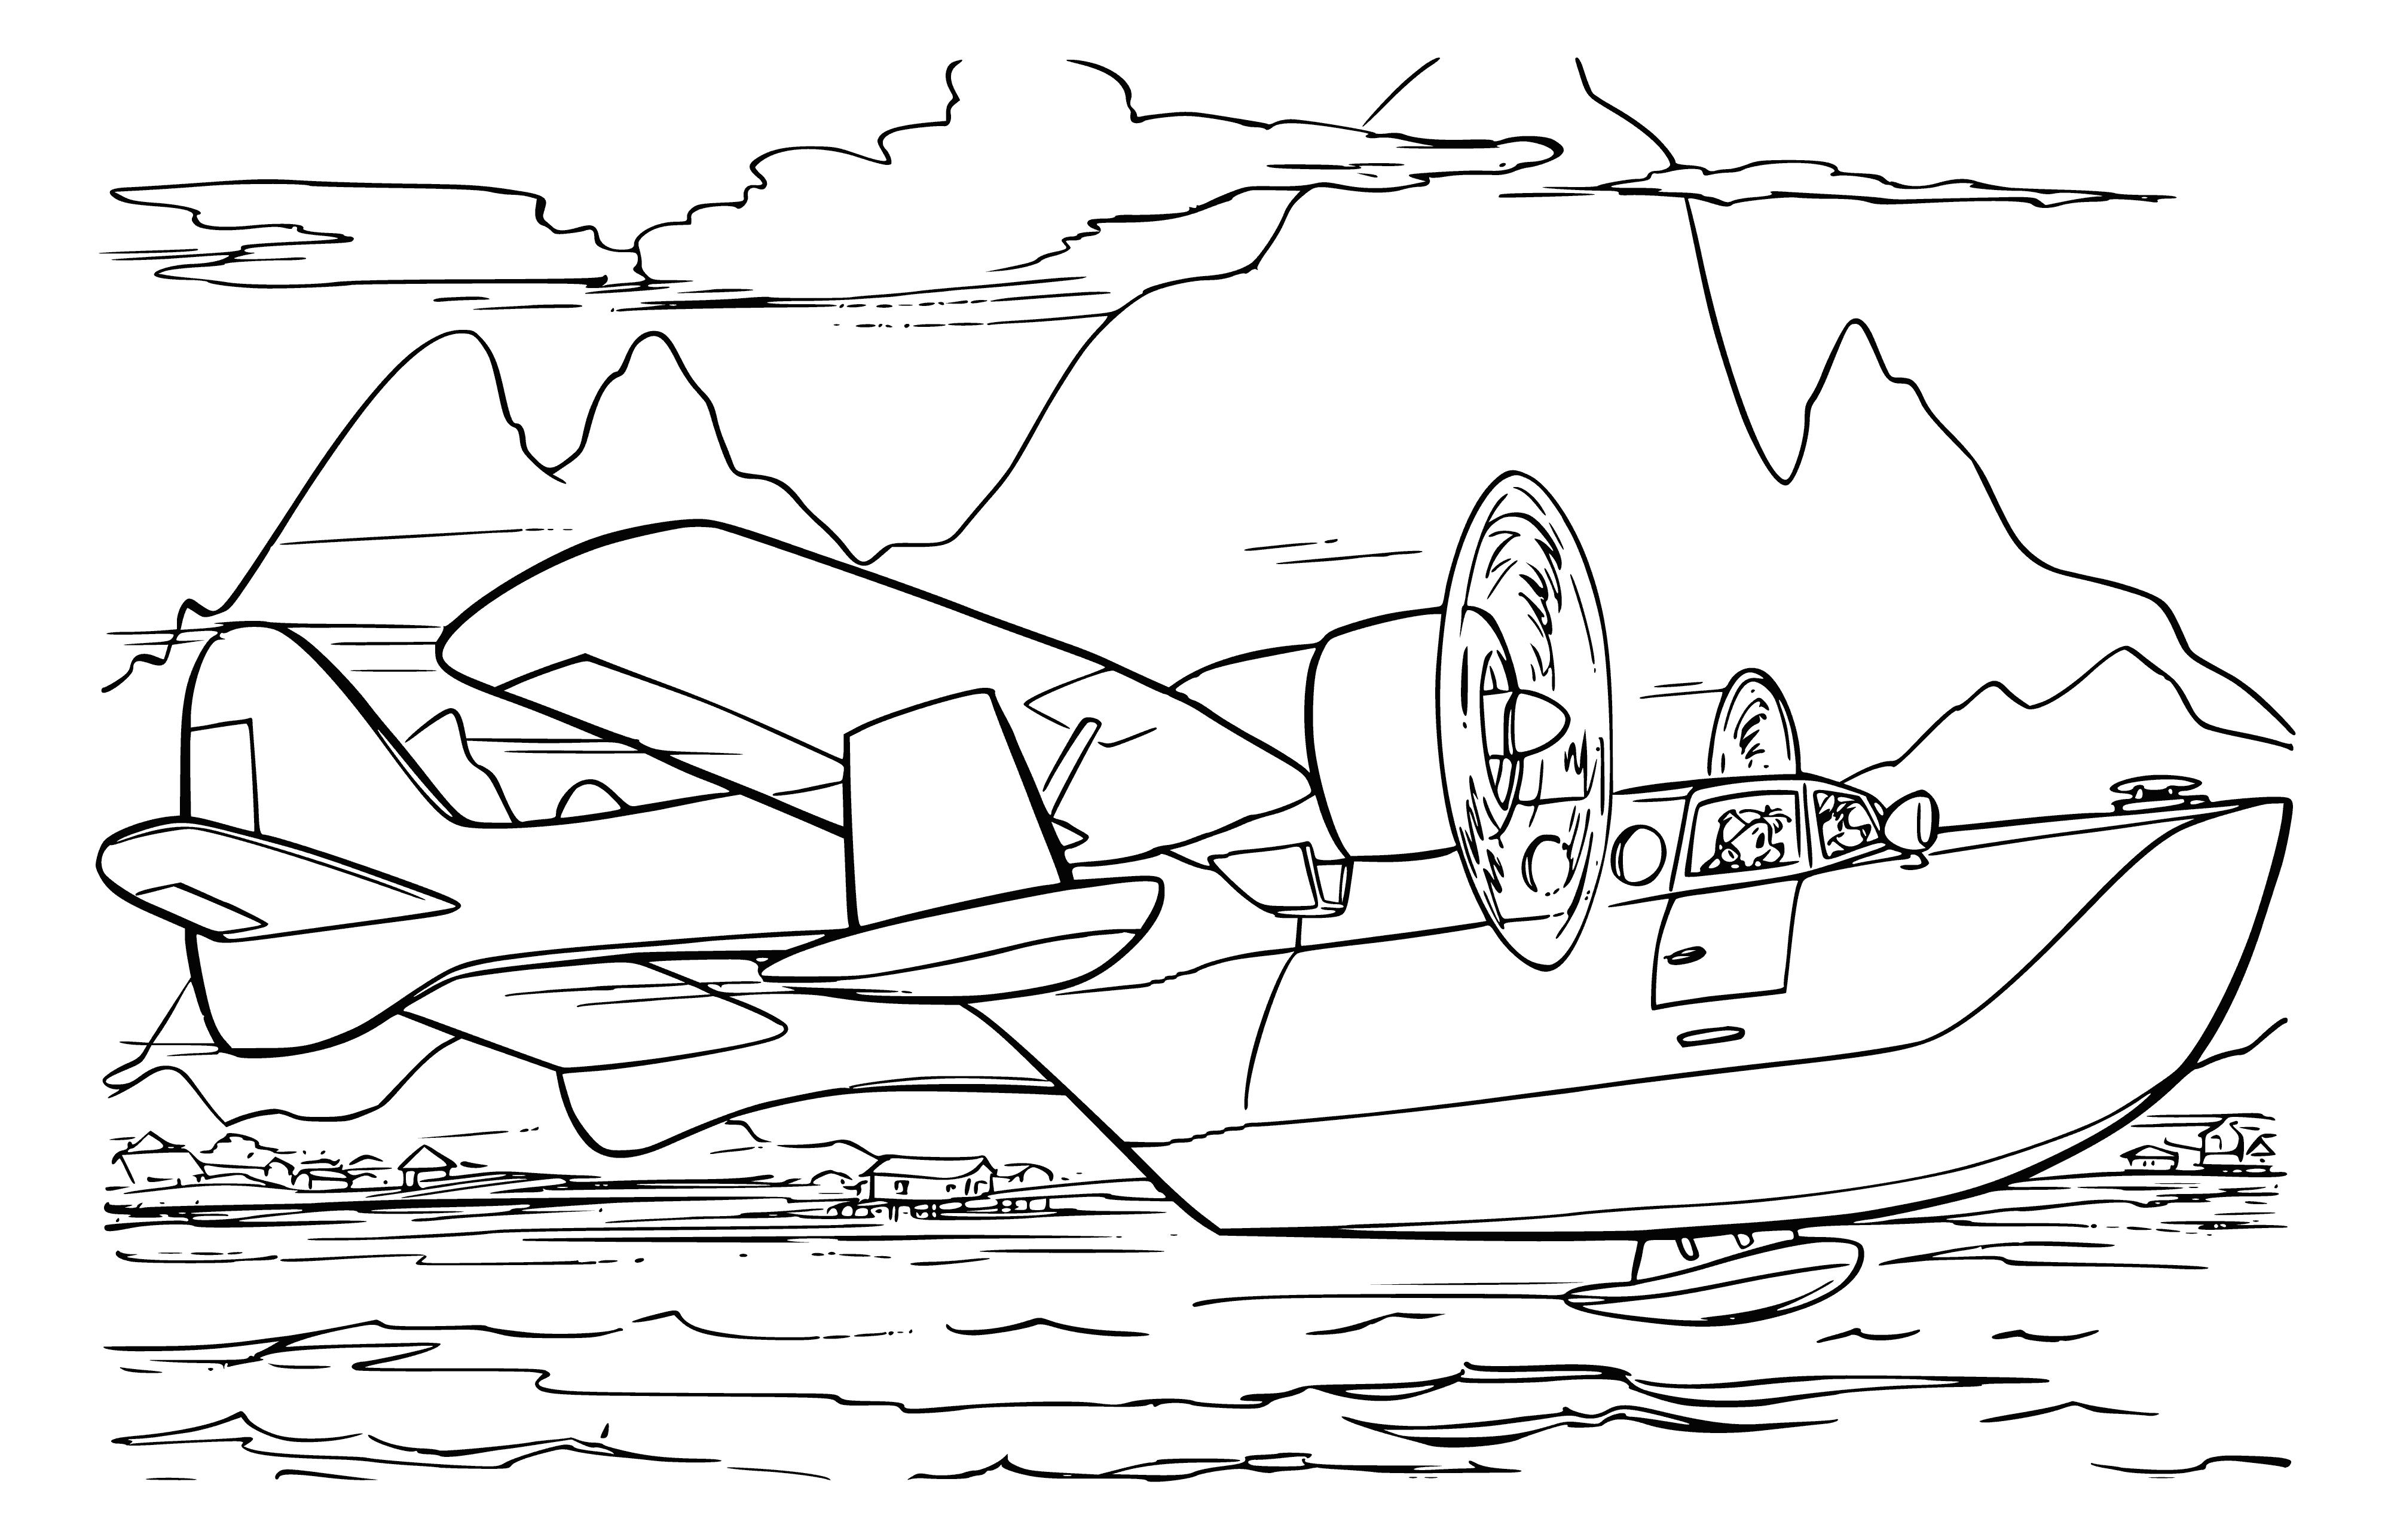 coloring page: Large, blue and white plane with red/white stripe flying over deep blue water and light blue sky- no other planes/objects in sight.